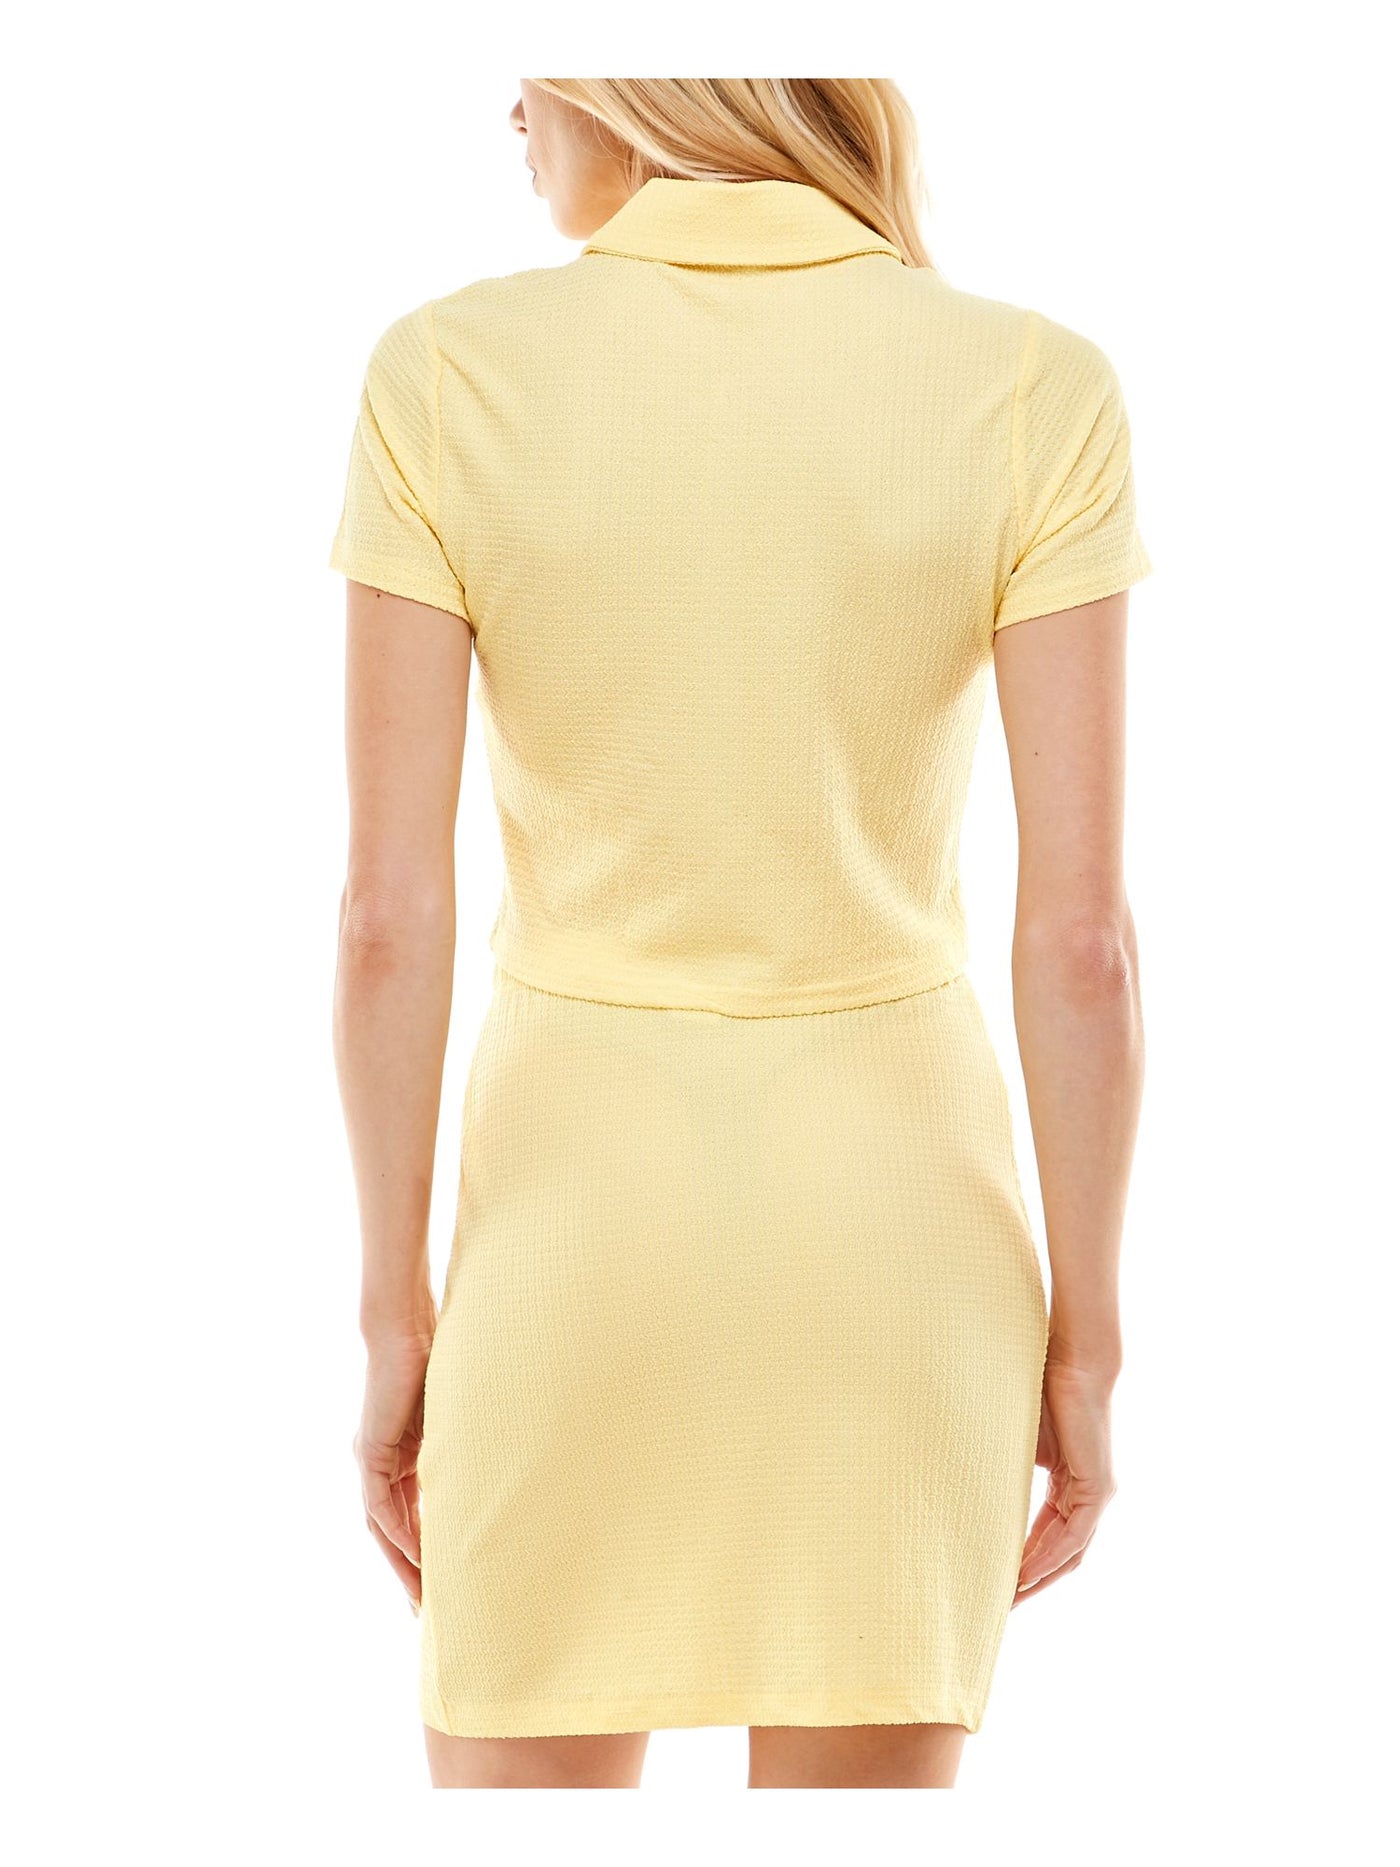 ULTRA FLIRT Womens Yellow Stretch Textured Short Sleeve Point Collar Above The Knee Party Body Con Dress Juniors M